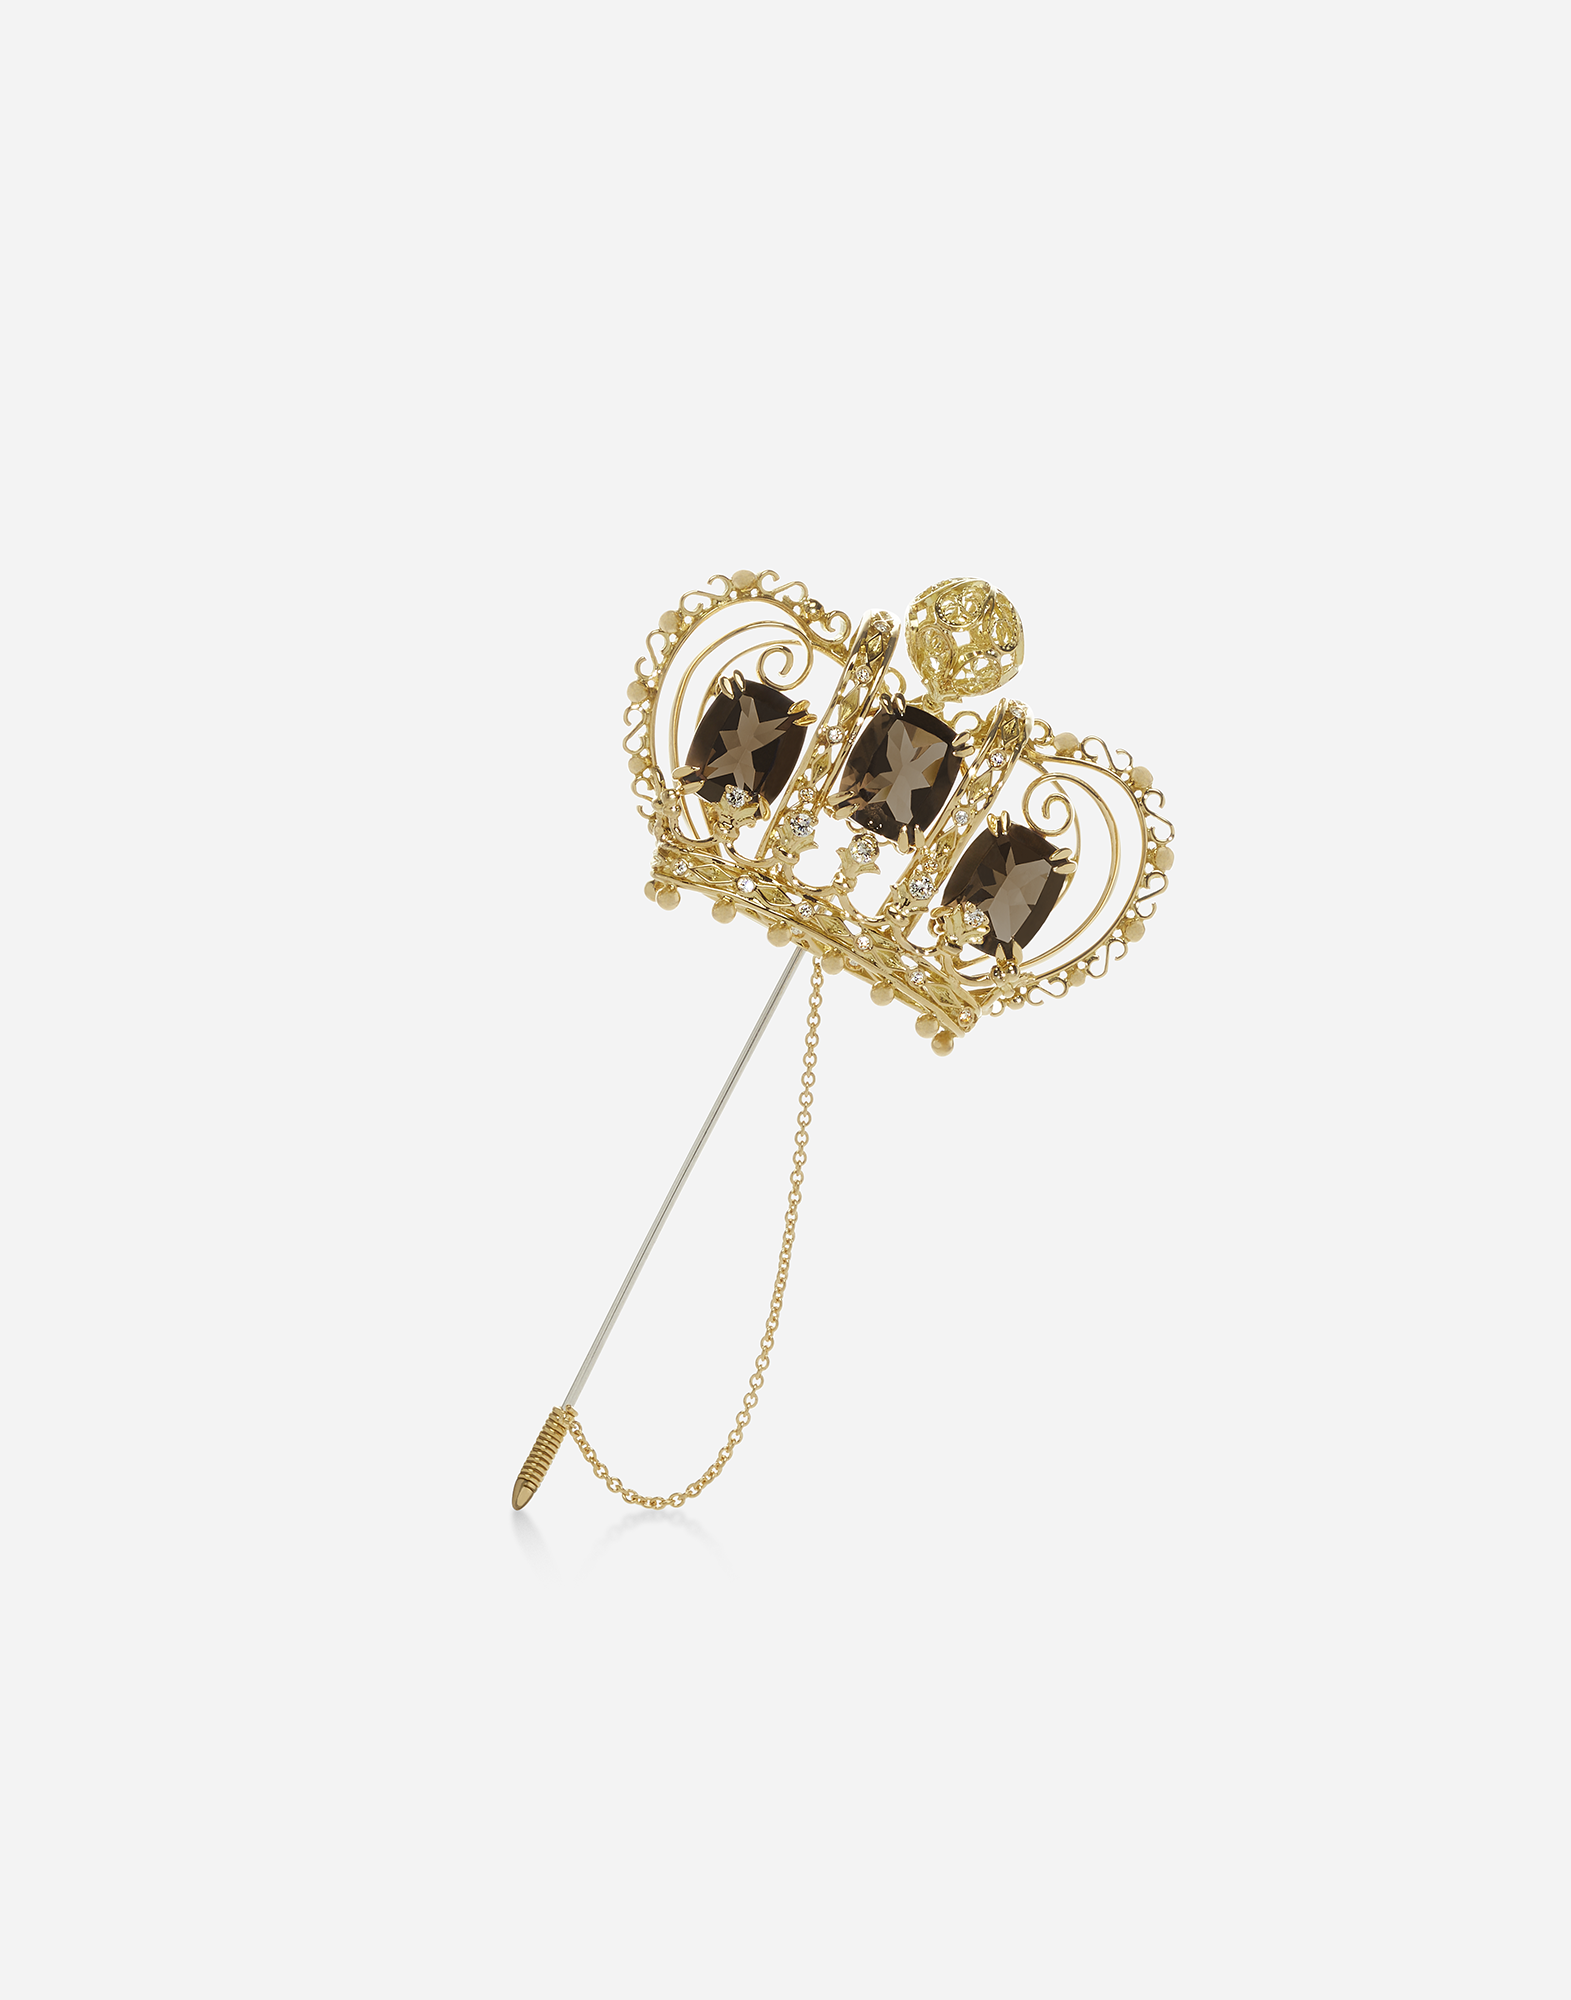 CROWN BROOCH WITH QUARTZES AND DIAMONDS